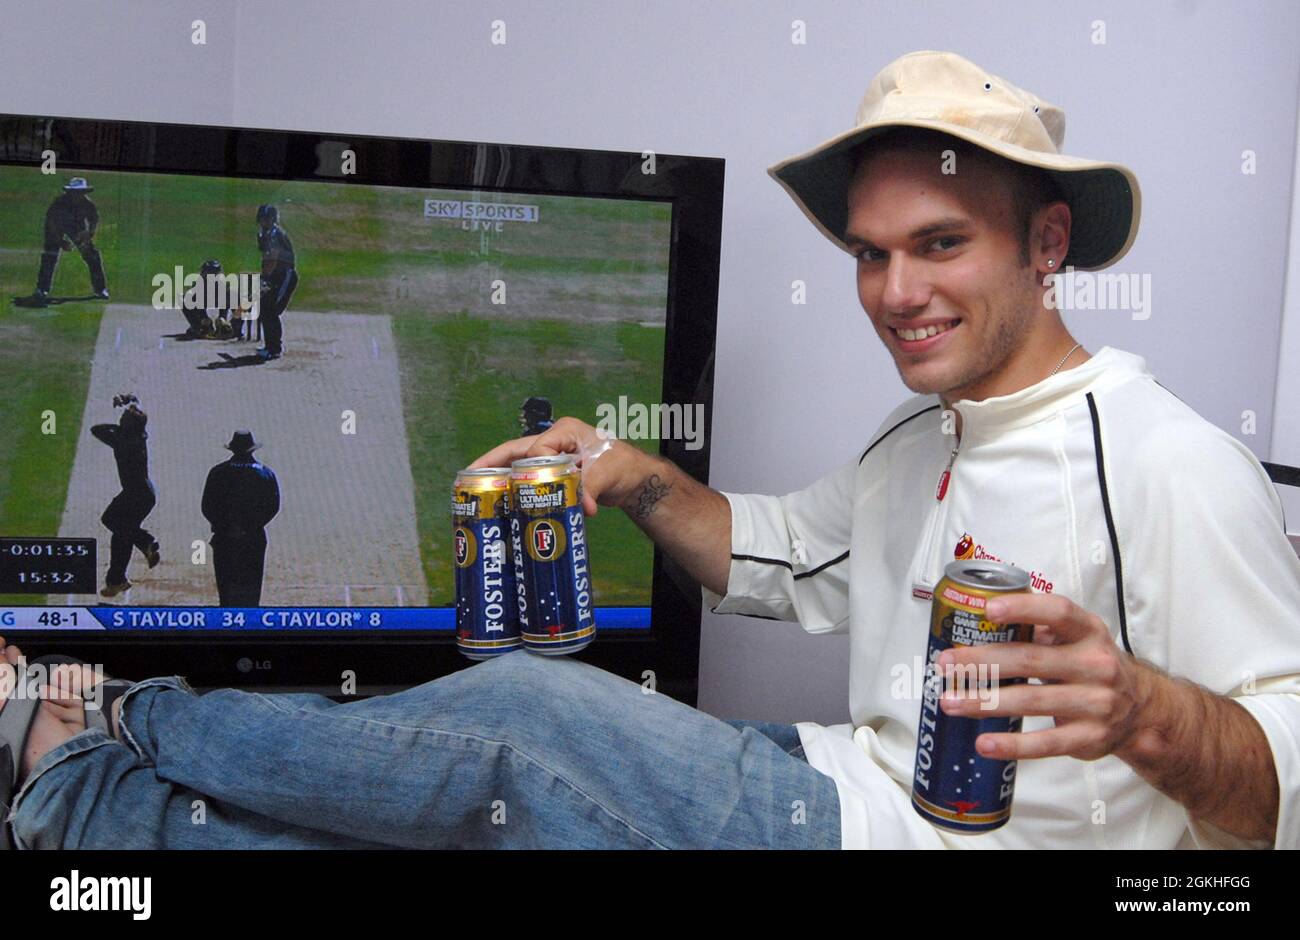 CRICKET FANATIC HARRY WISEMAN FROM PORTSMOUTH WHO HAS GIVEN UP HIS JOB TO WATCH THE ASHES. PIC MIKE WALKER, 2009 Stock Photo